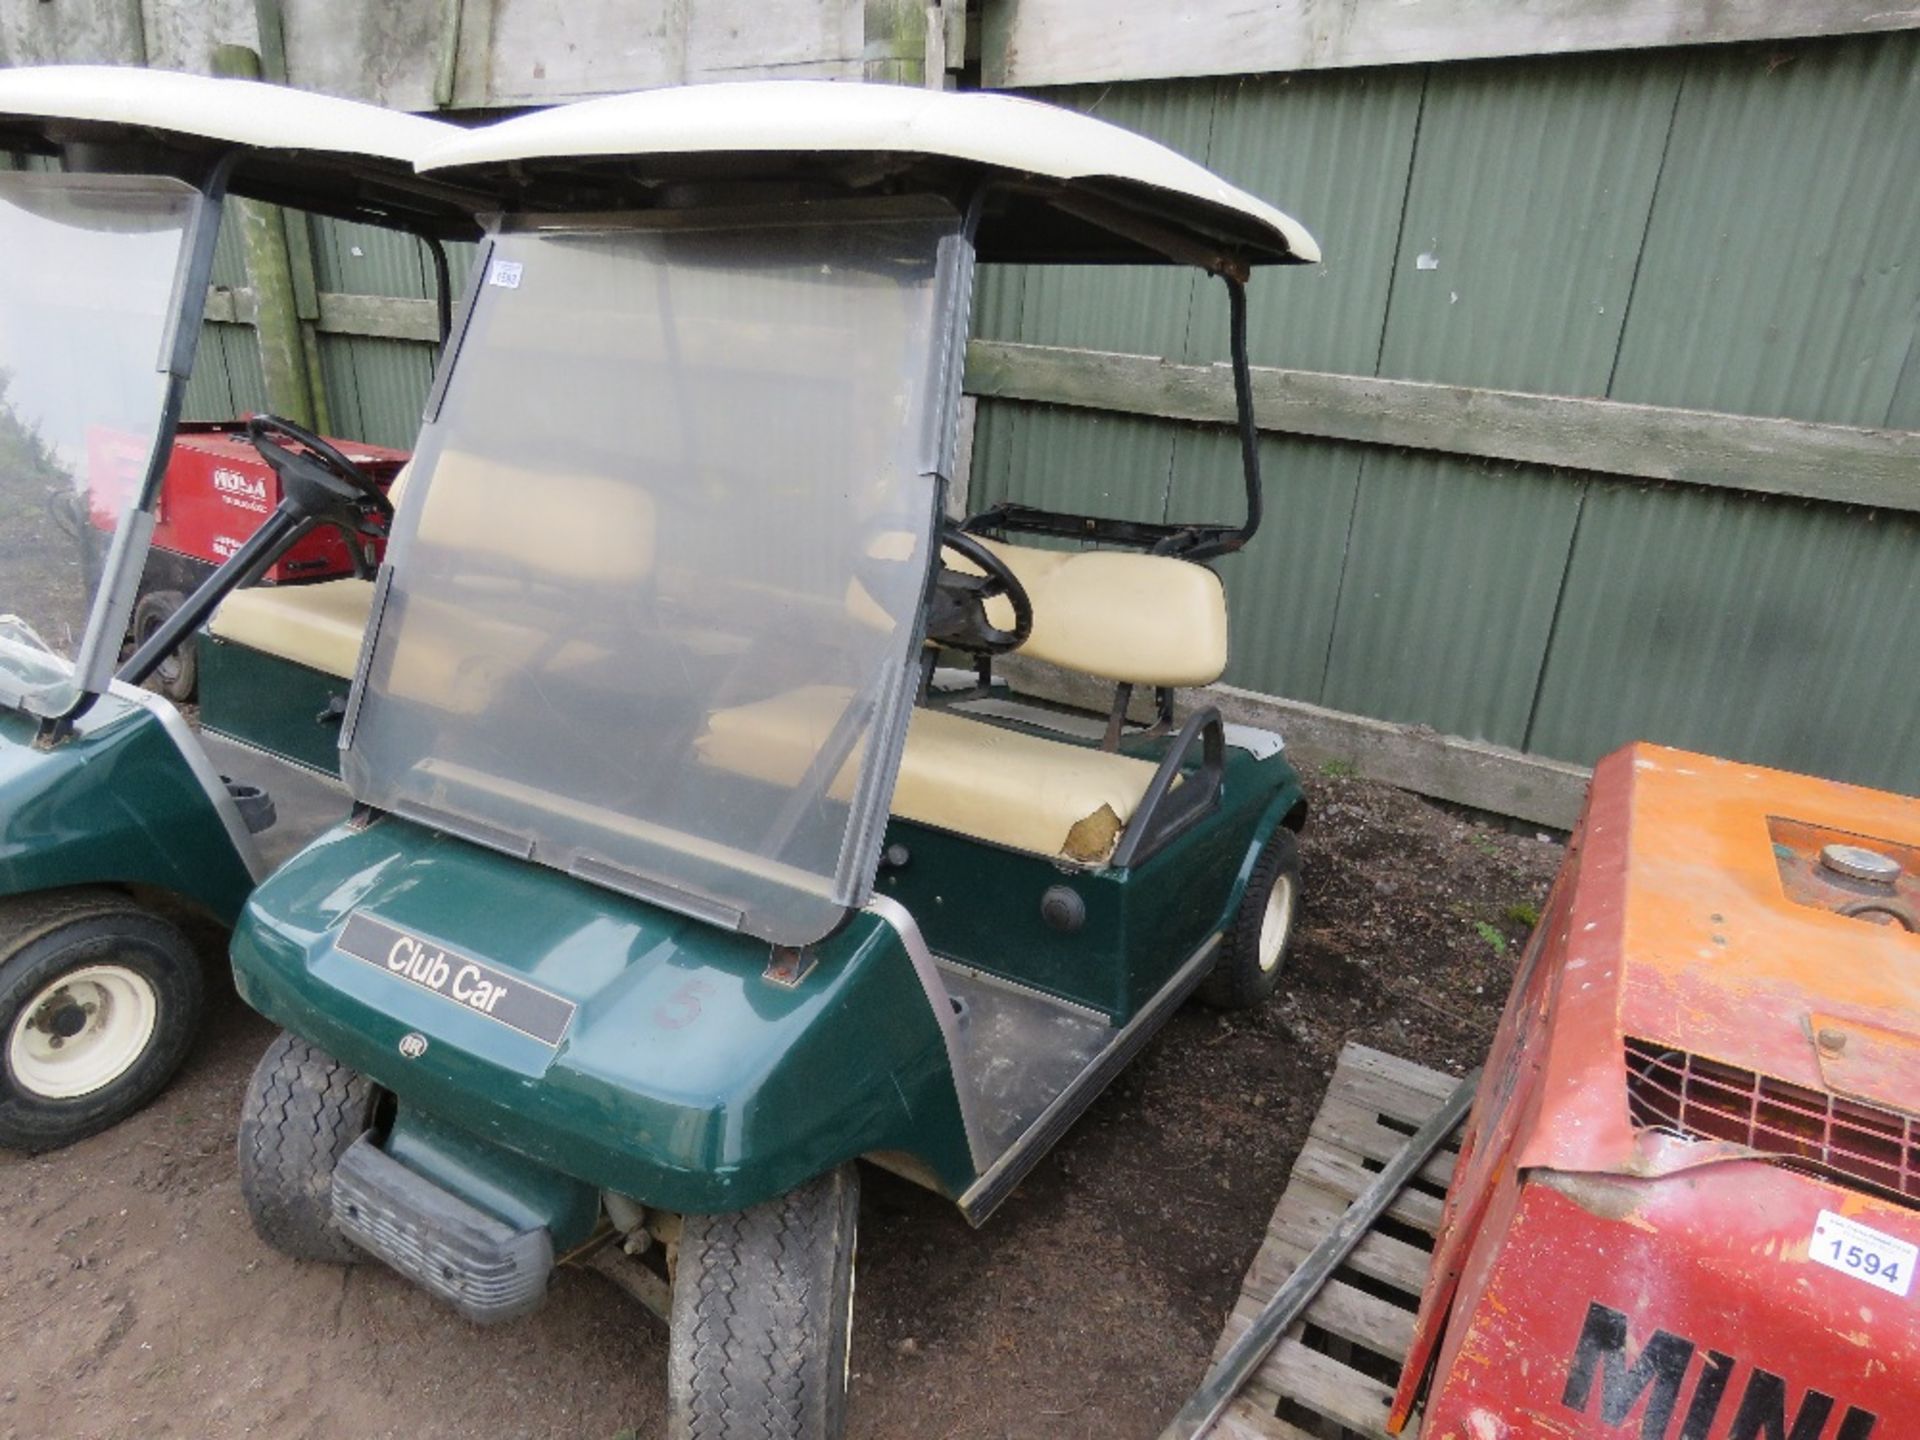 CLUBCAR PETROL ENGINED GOLF CART. BEEN STORED FOR SOME TIME, UNTESTED. - Image 2 of 8